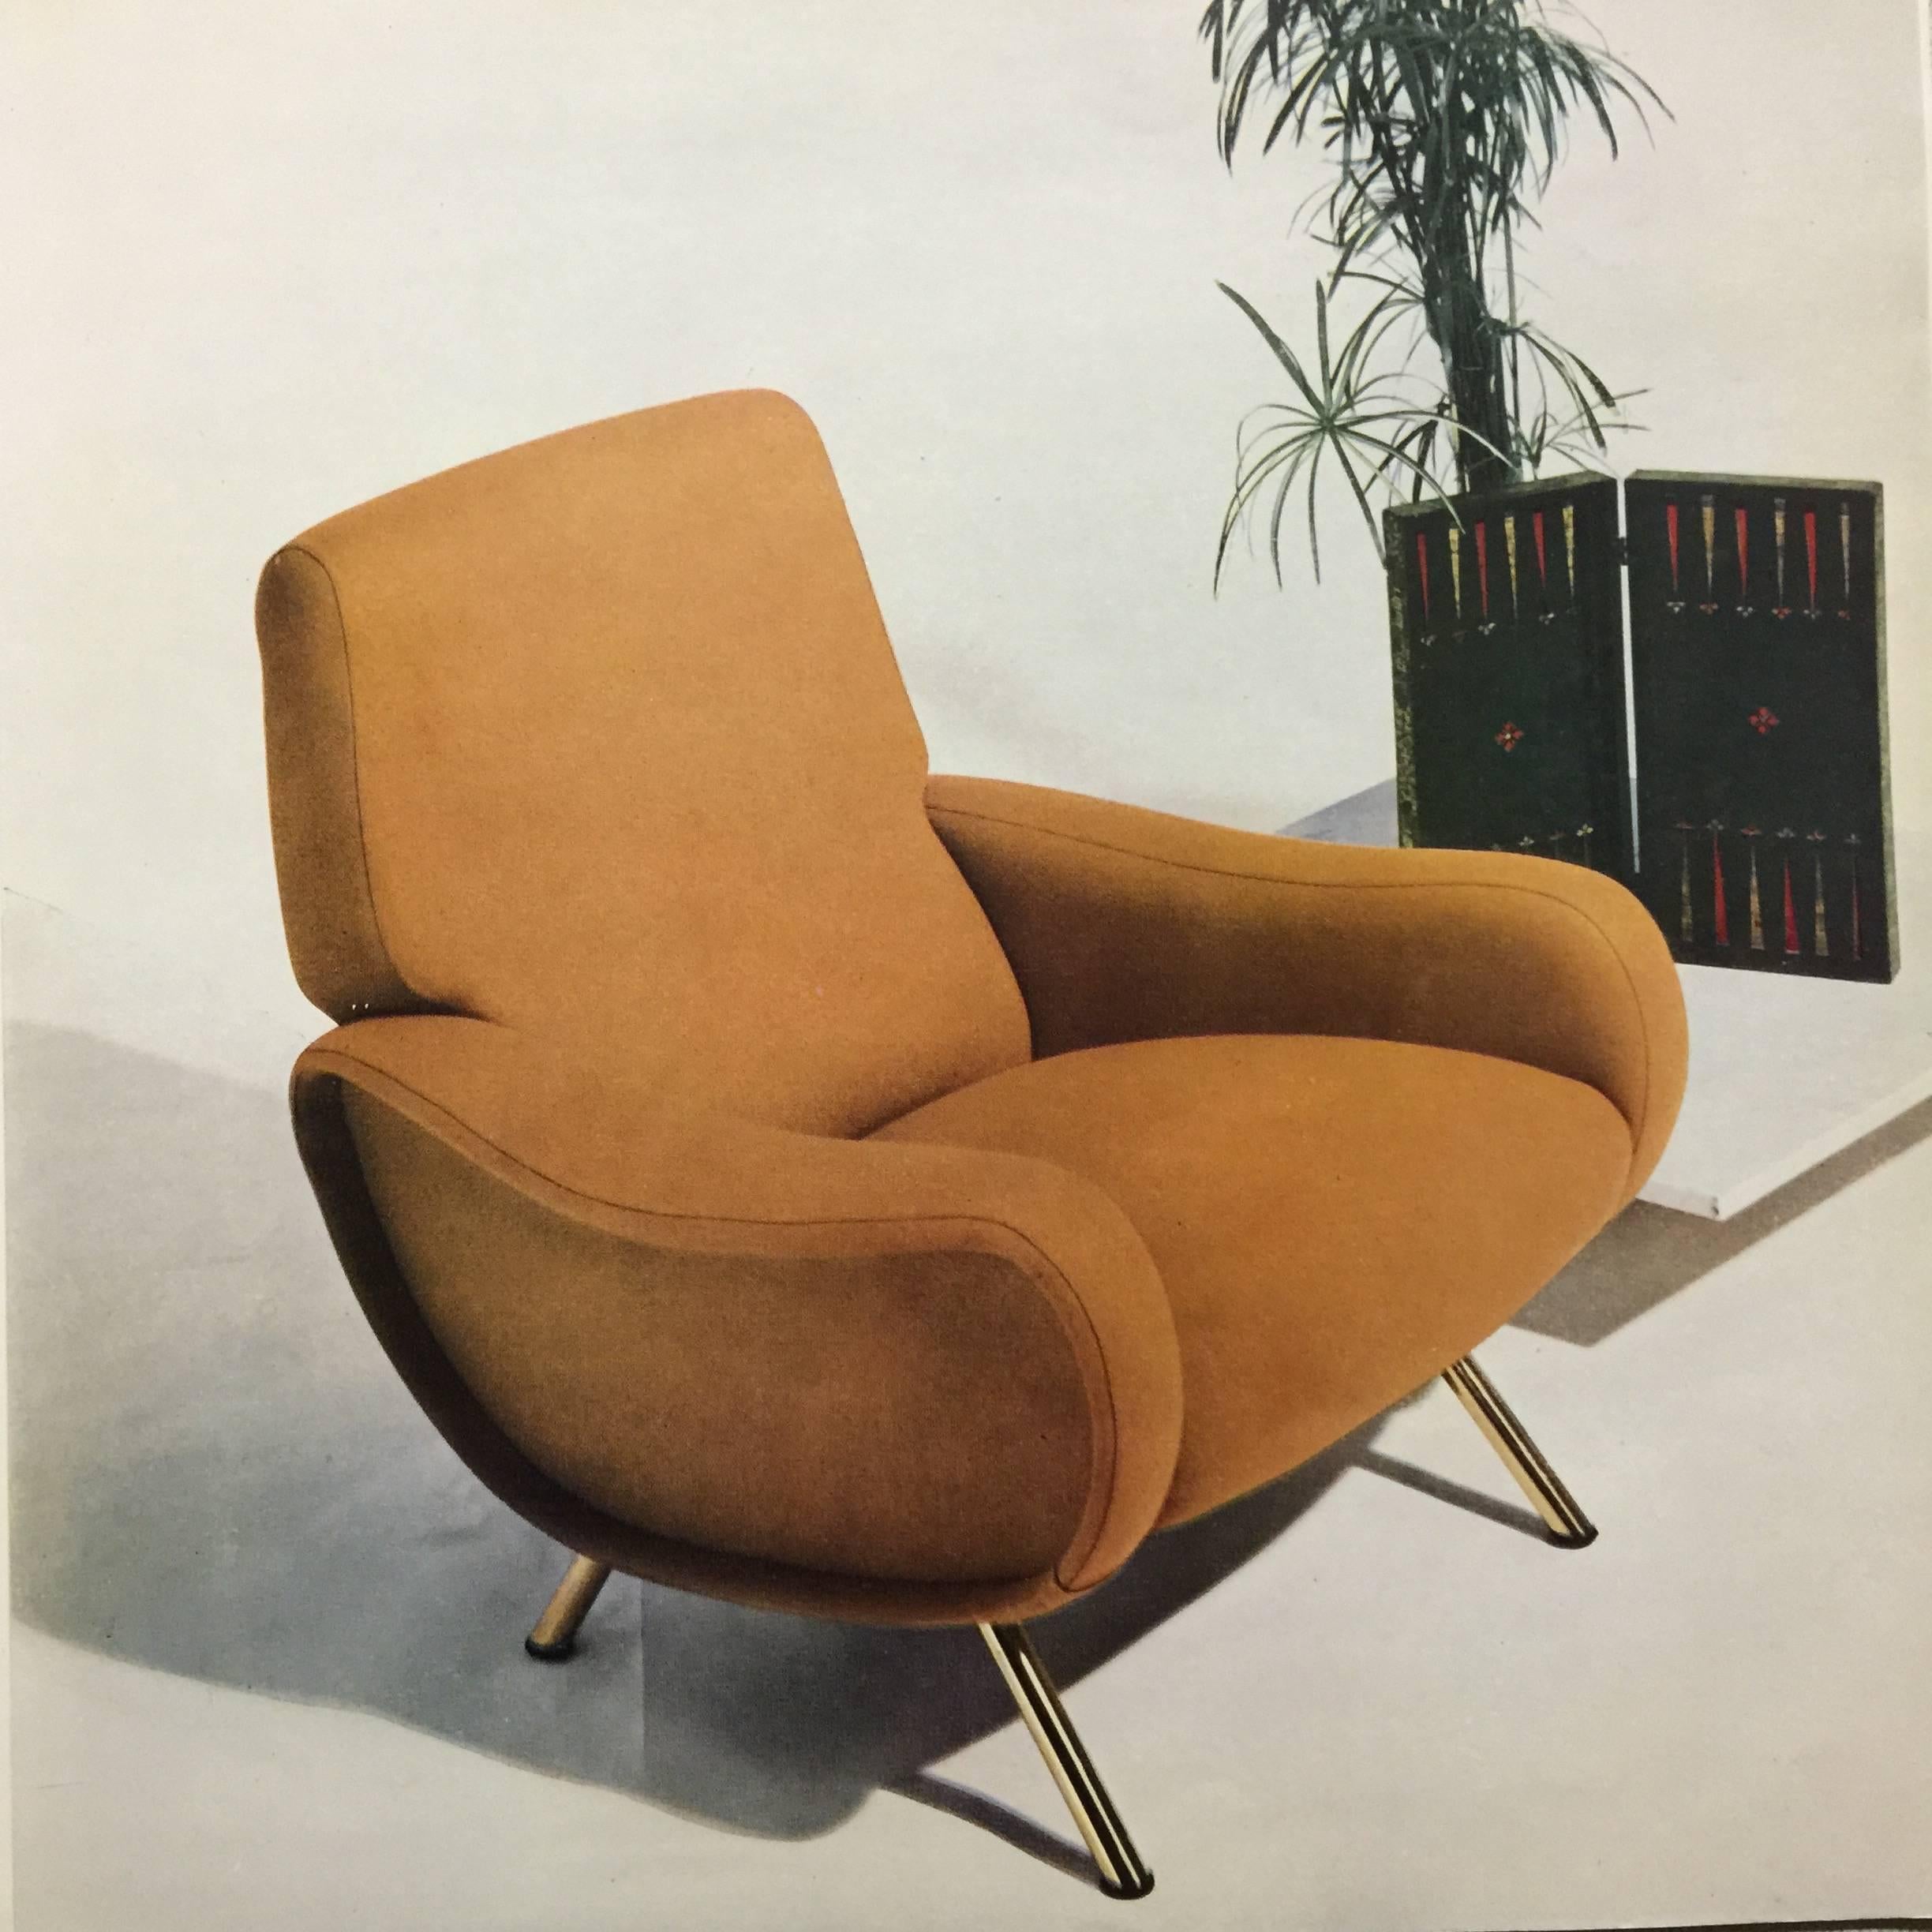 Fully restored iconic 'Lady' lounge chair designed by Marco Zanuso for Arflex, Italy in 1951. This design won the gold medal prize at the 1951 'IX Triennale' international design exhibition in Milan. 

This lady has been lovingly restored